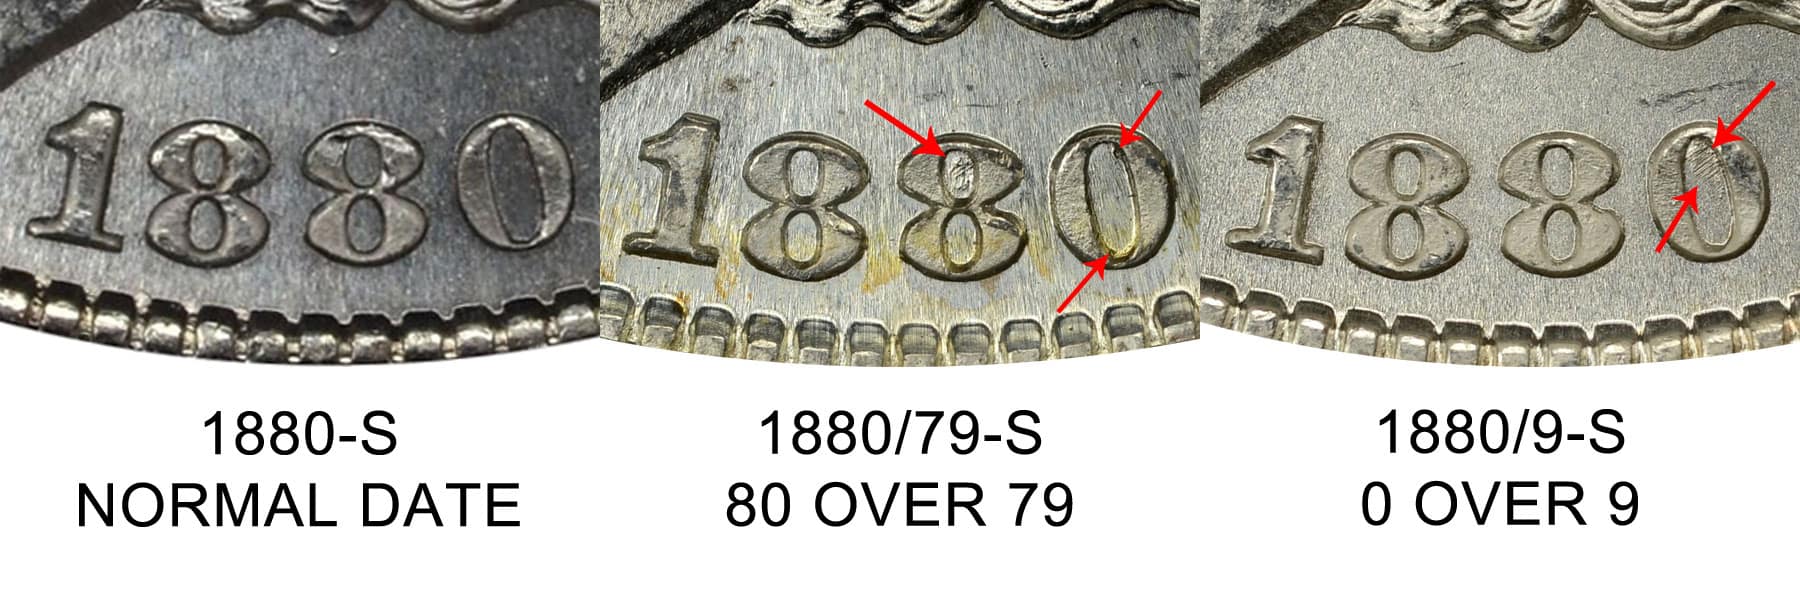 1880 Silver Dollar Varieties and Errors